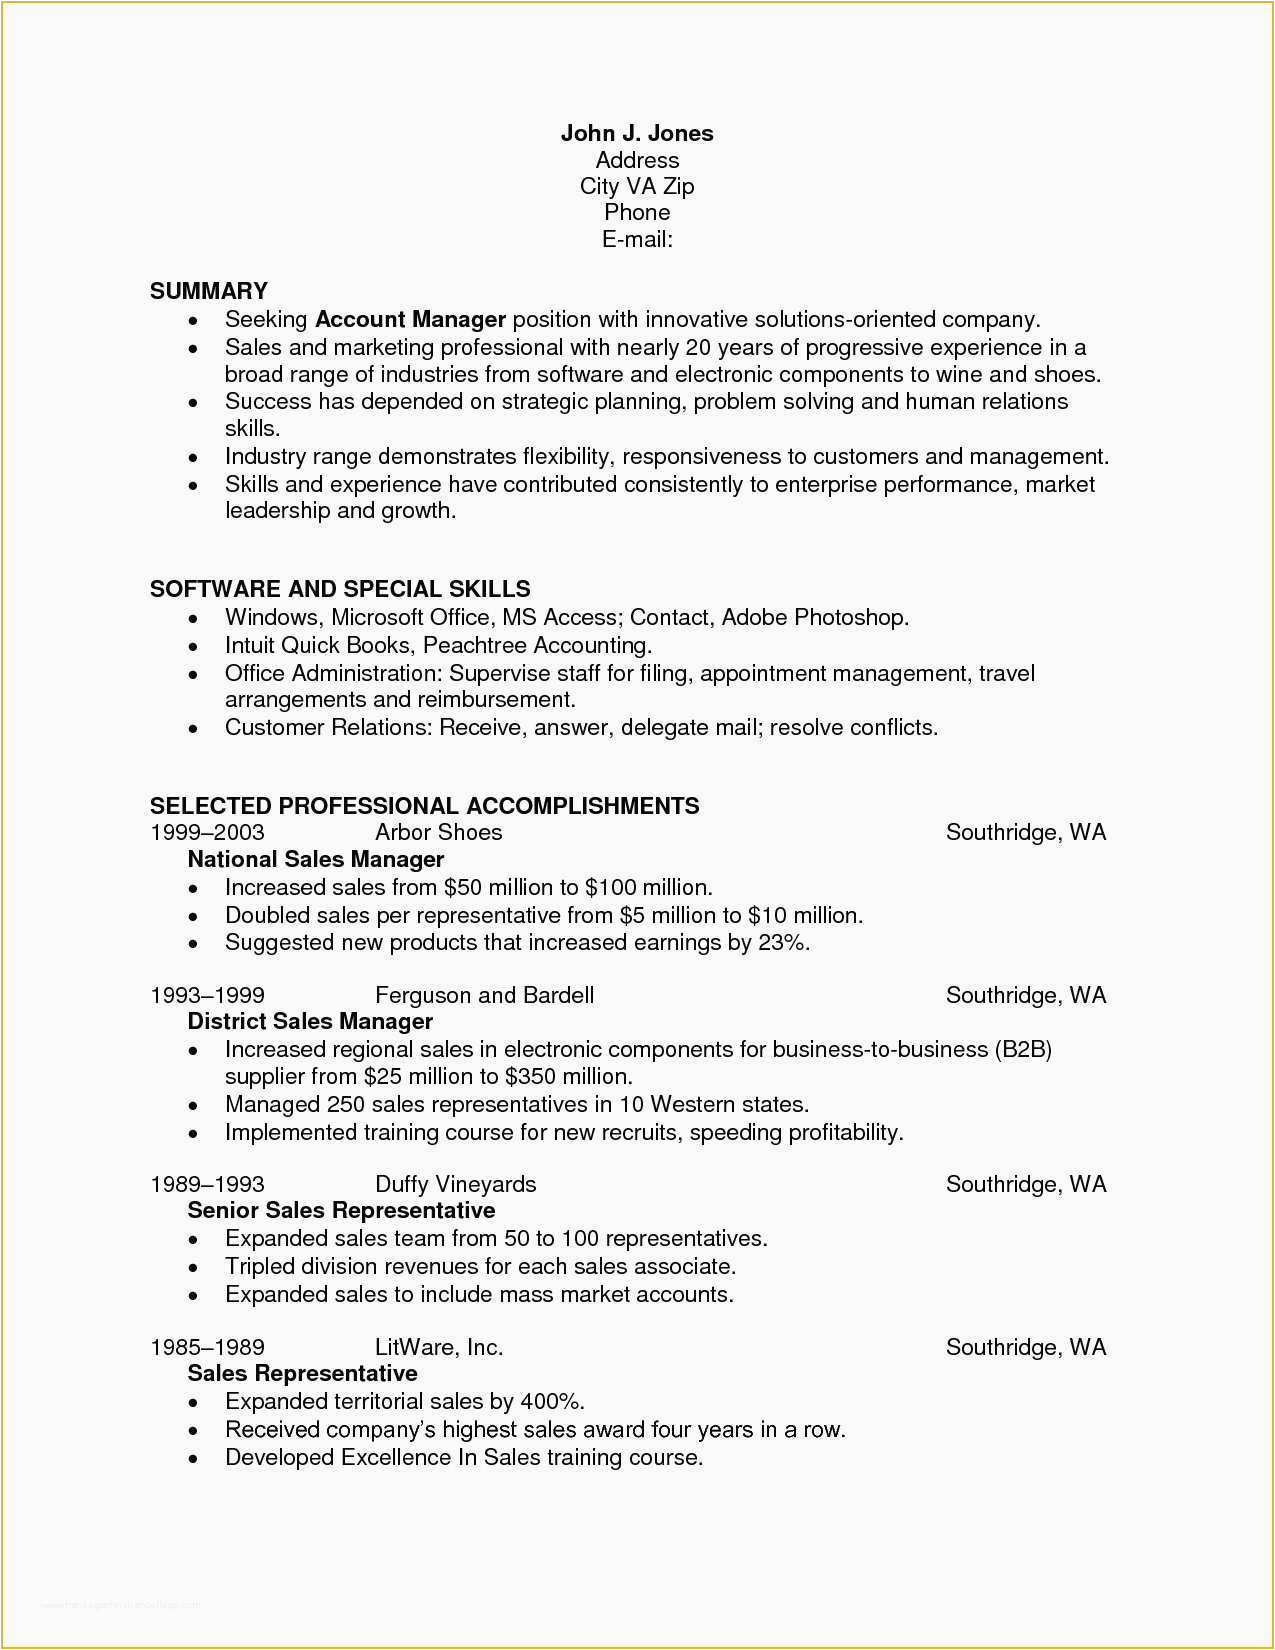 Quick and Easy Resume Template Free Quick Resume Template Free 8 Easy Resume format Sample